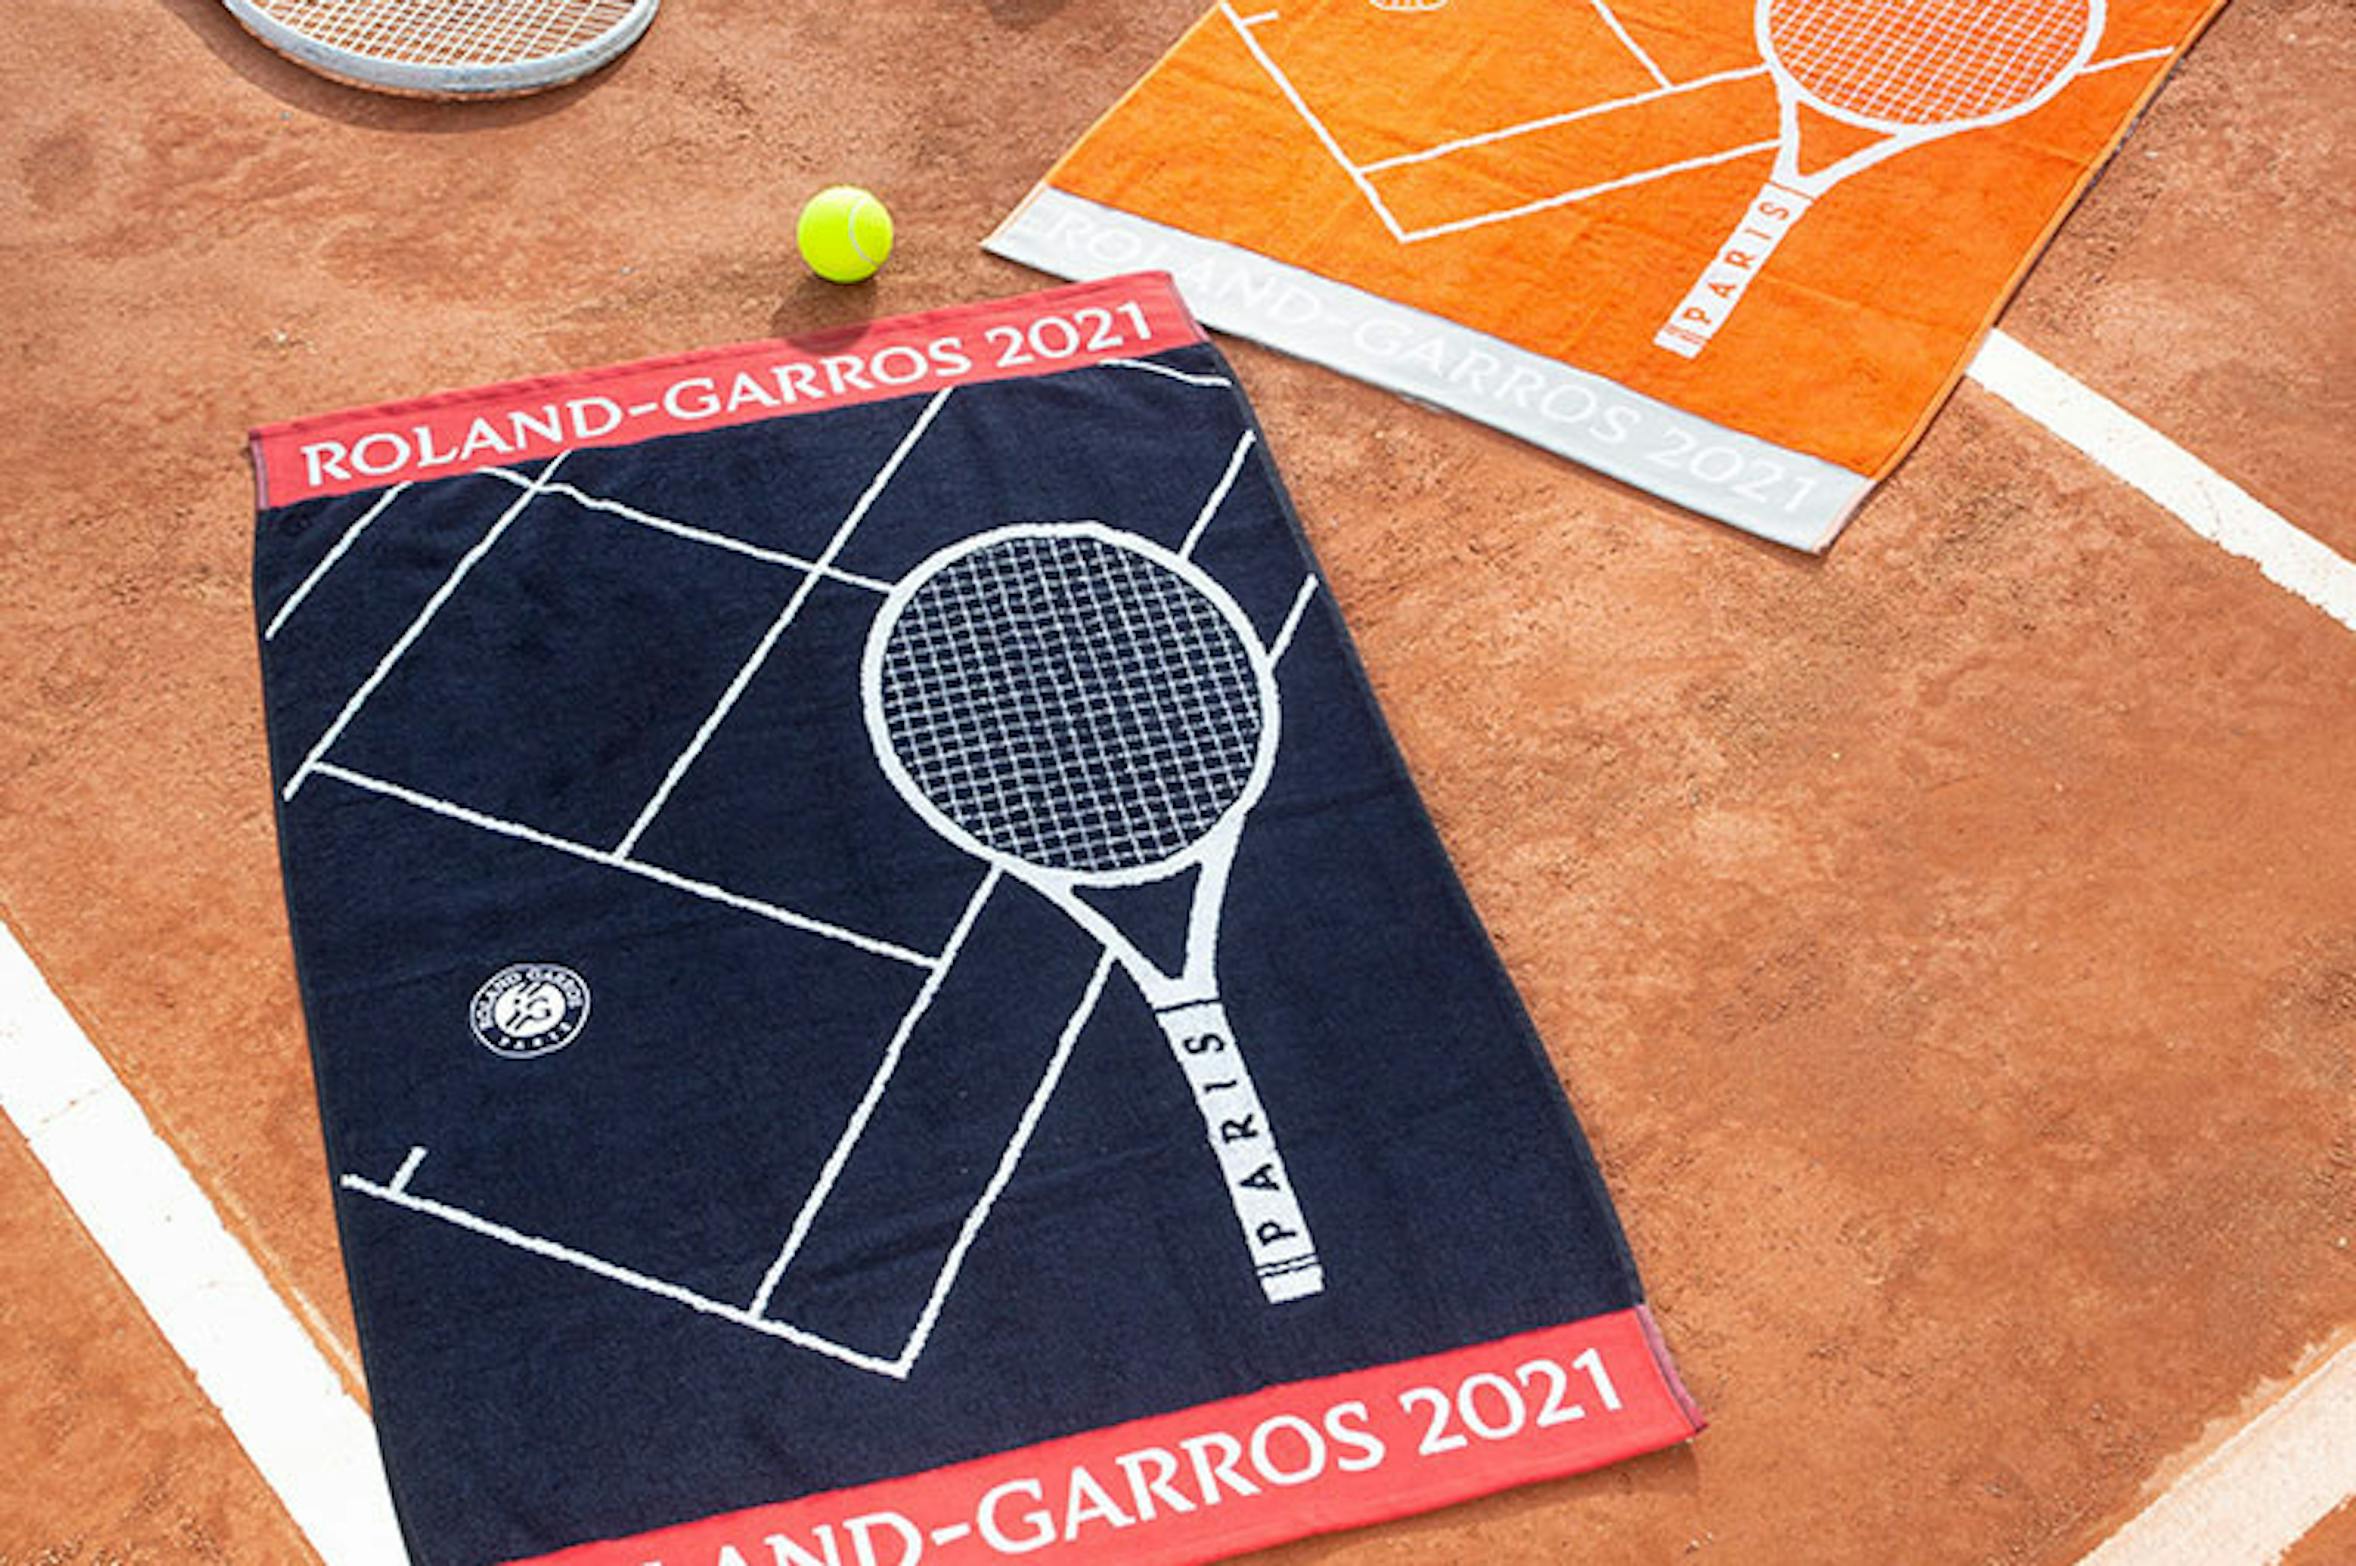 The official RolandGarros 2021 towels are here! RolandGarros The